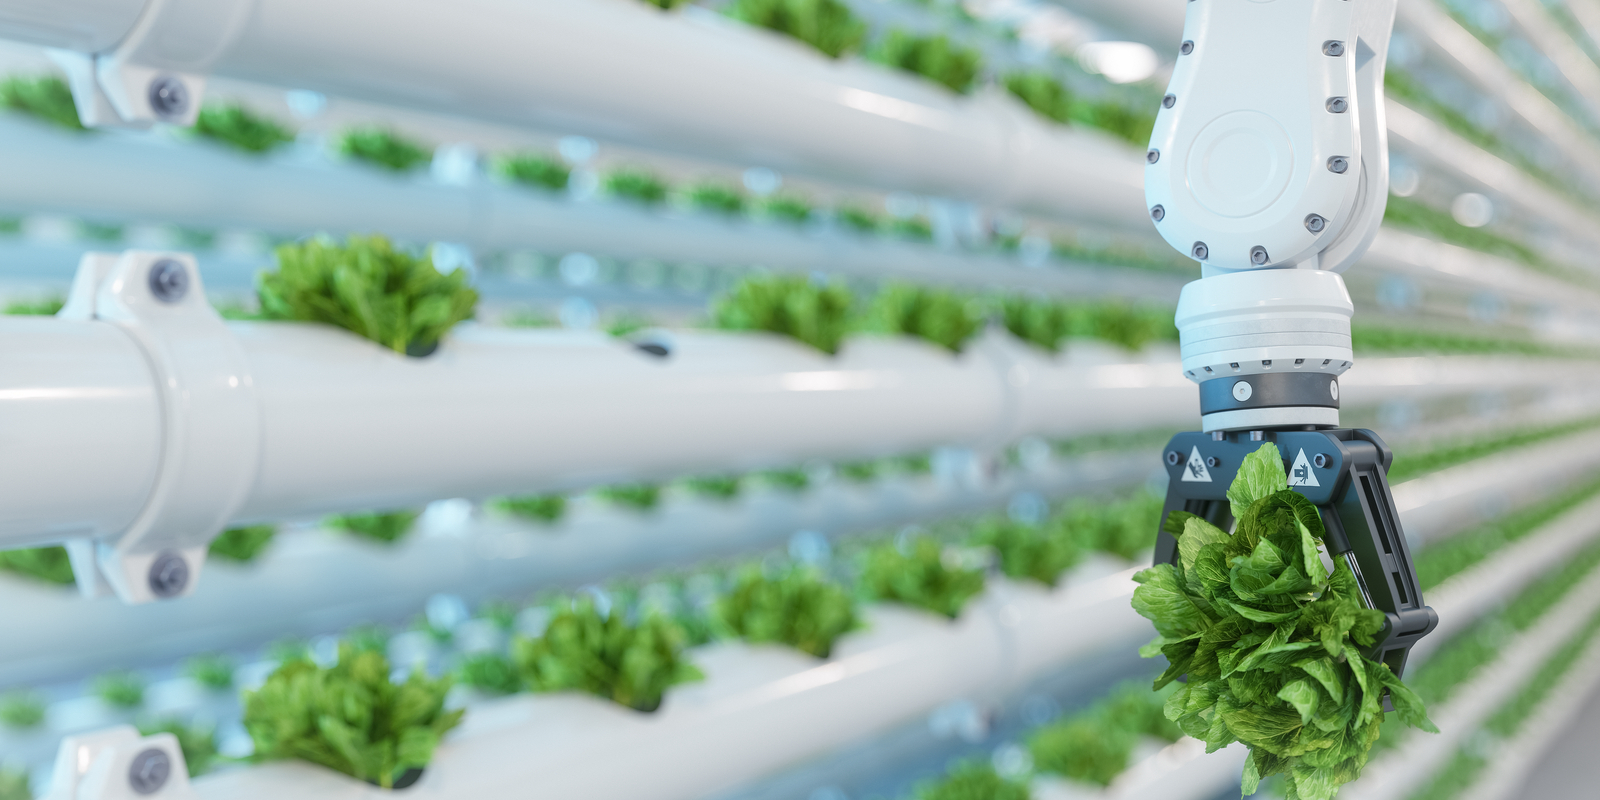 Automatic Agricultural Technology with Robotic Arm Harvesting Lettuce